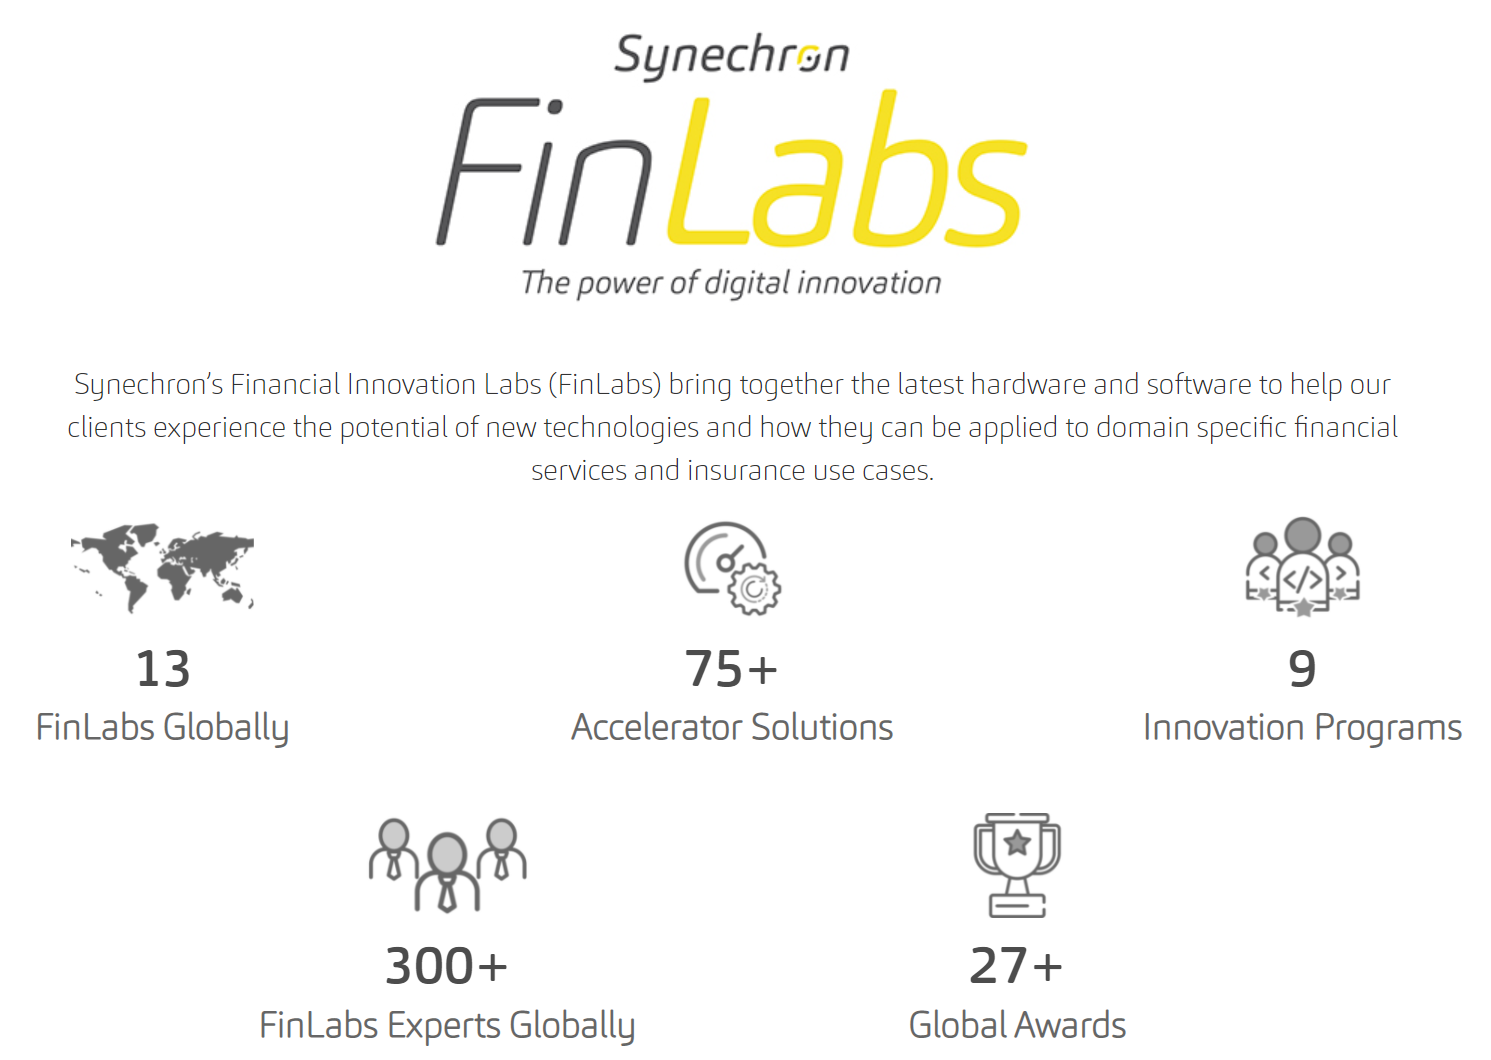 Synechron product / service